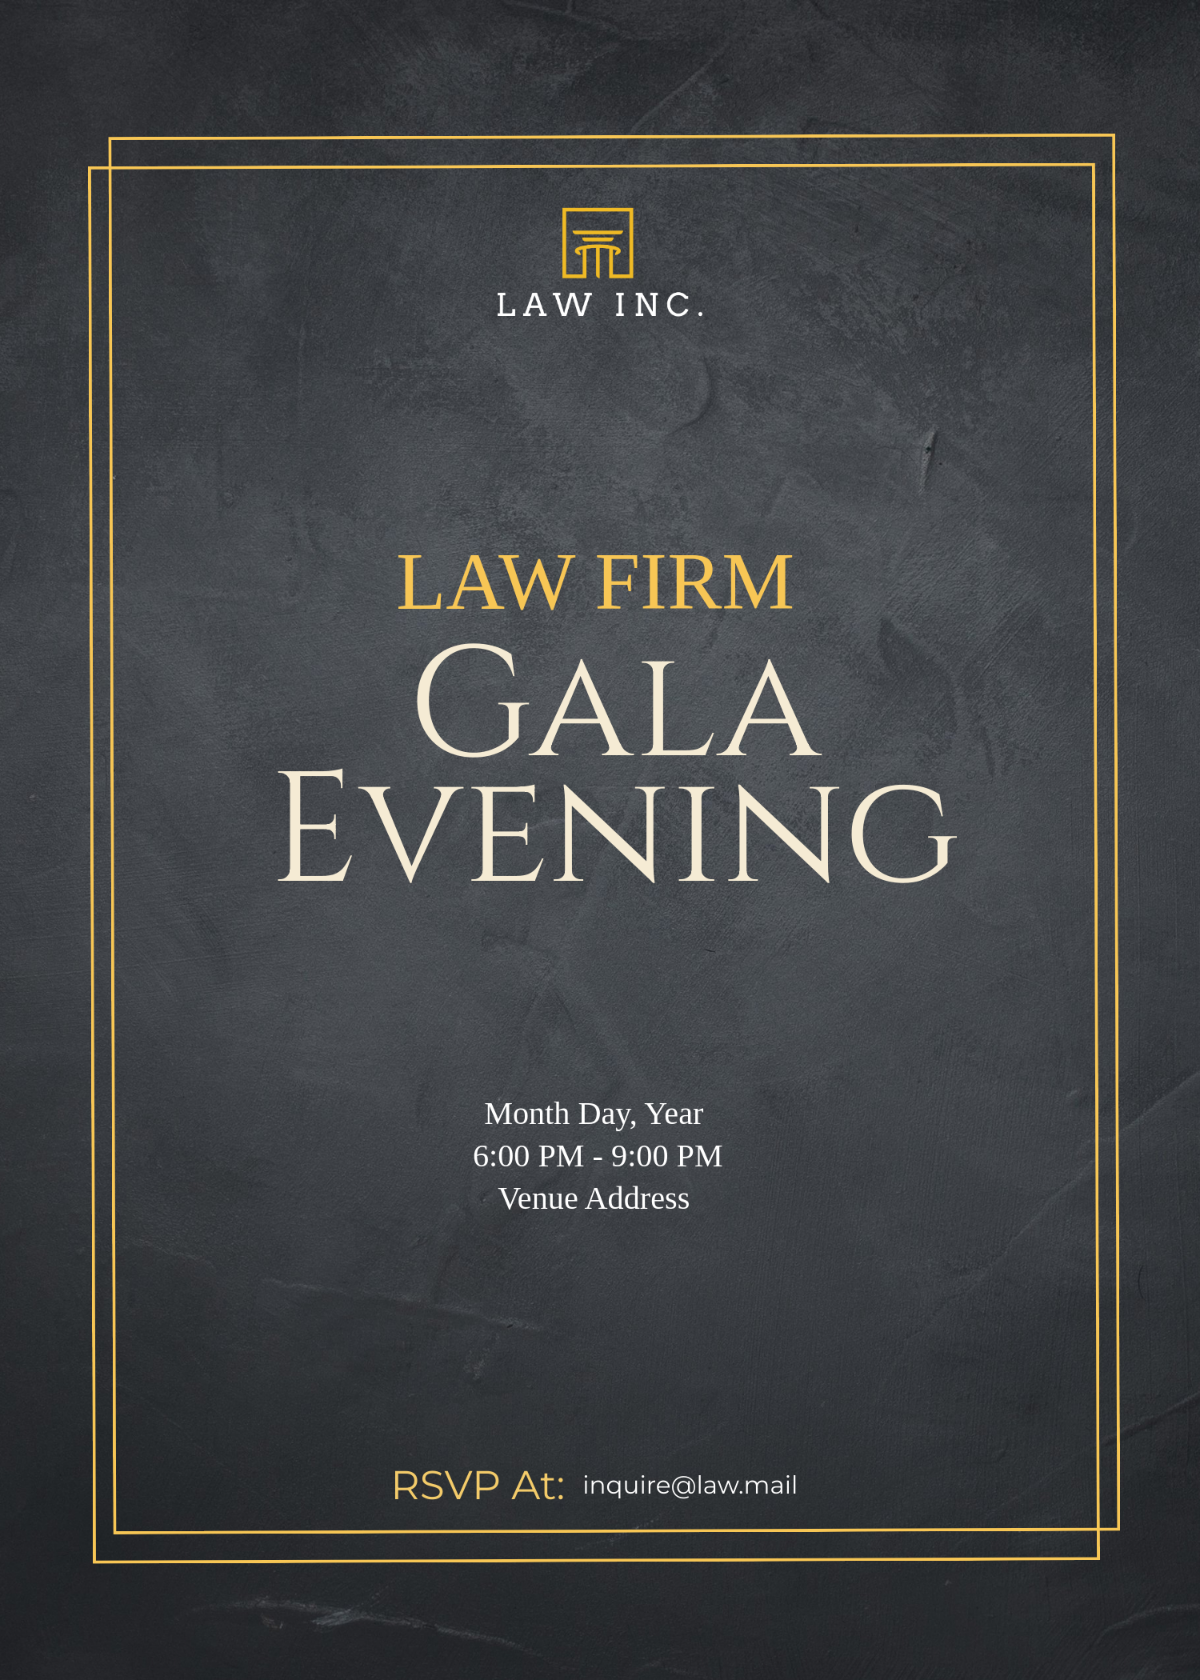 Law Firm Dinner Invitation Template